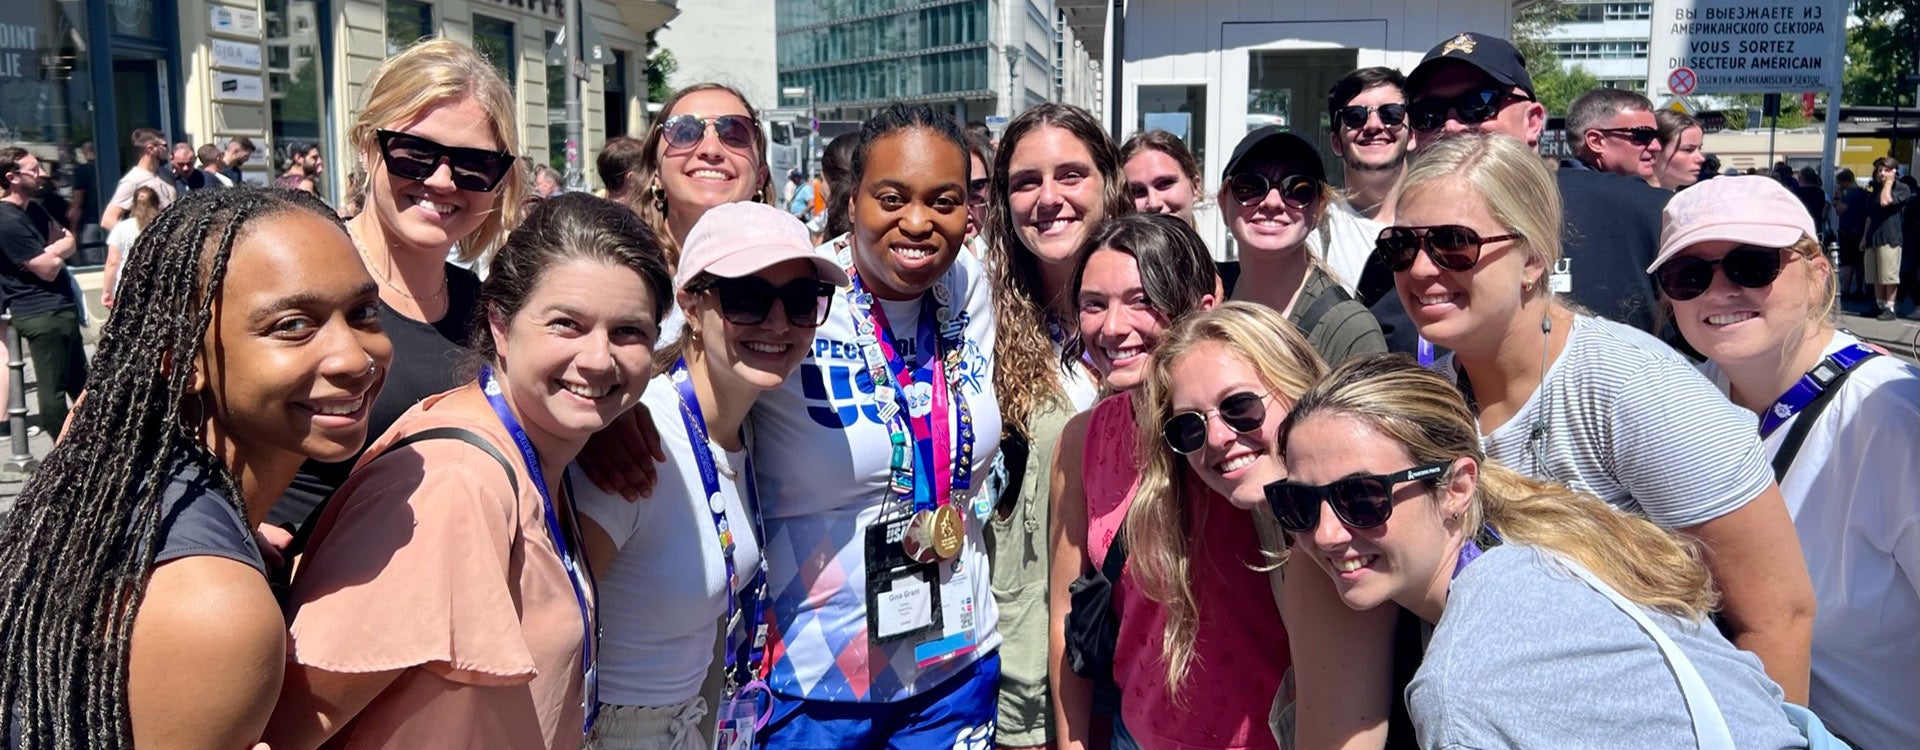 Volunteers from ECU smile with an American athlete at the Special Olympics World Games in Berlin.